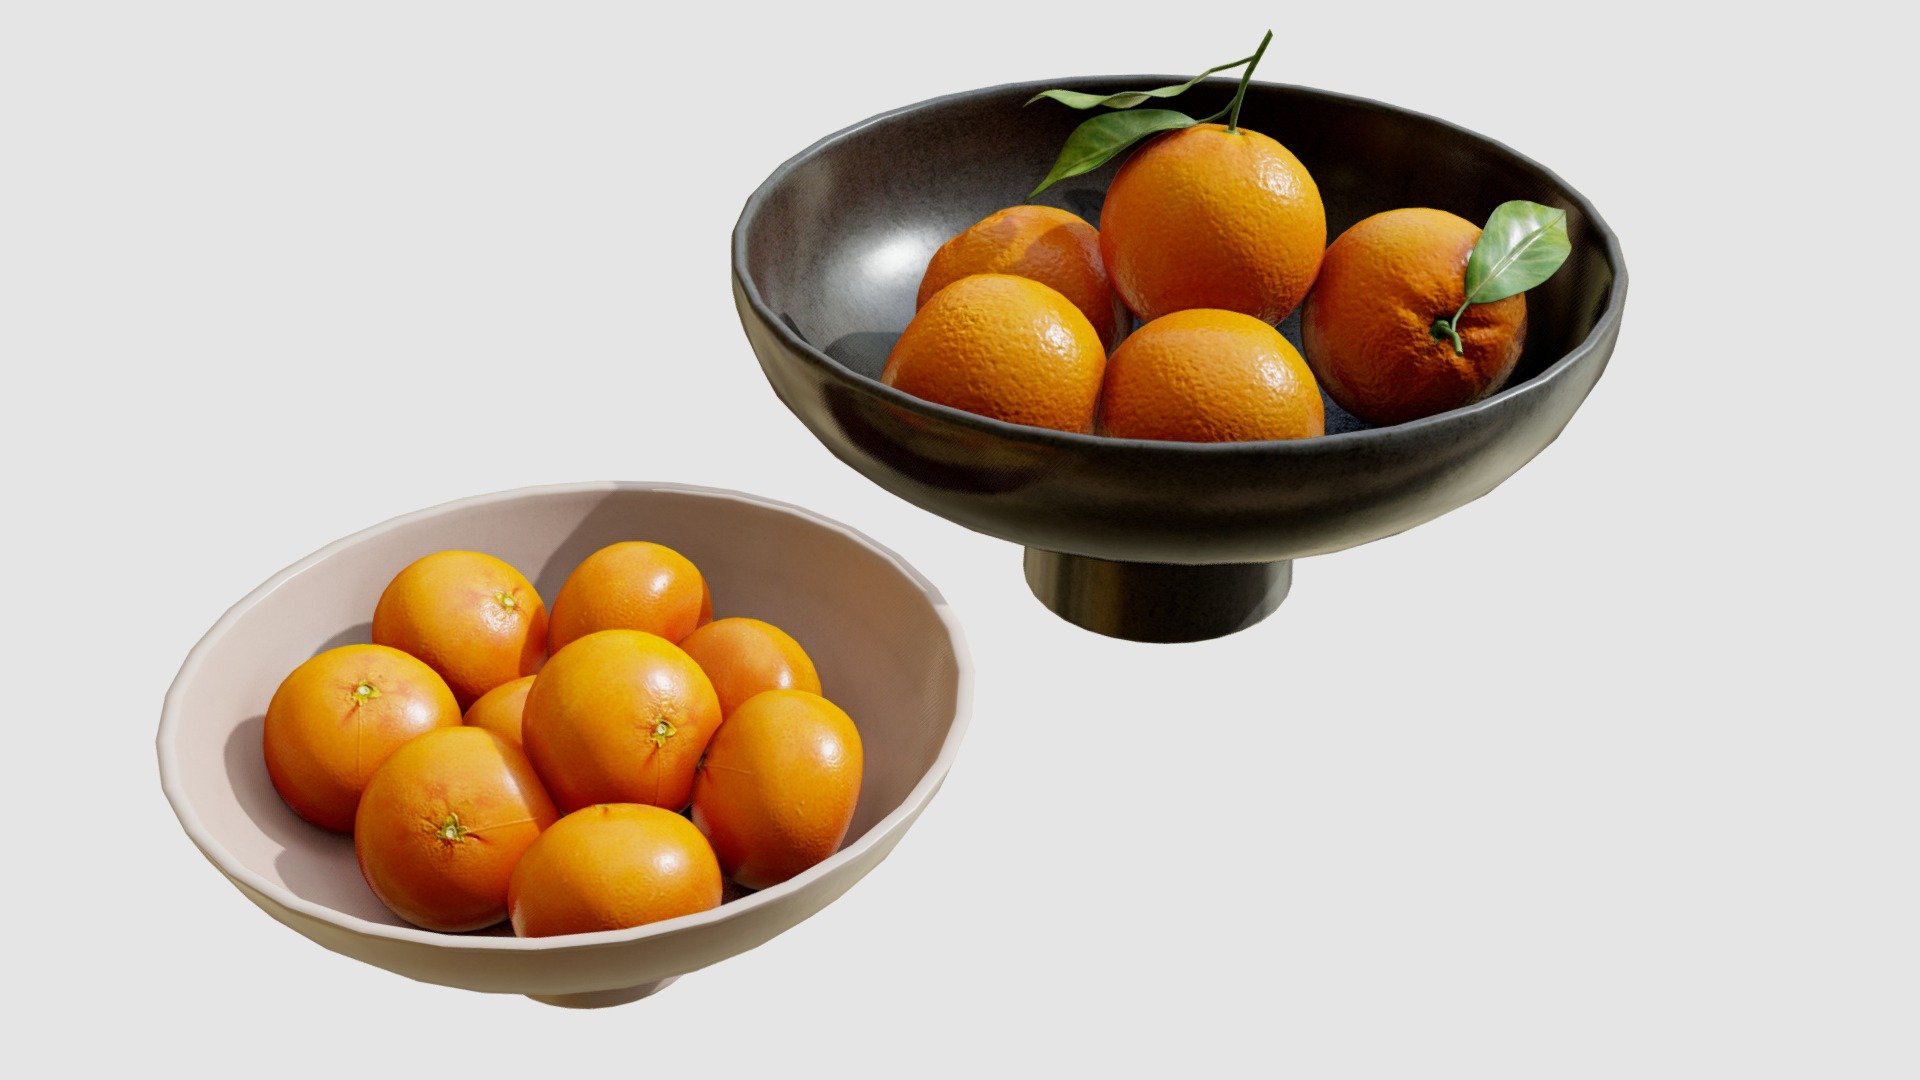 3D model - Food Set 04 / Bowls with Oranges and Mandarins. 
PBR materials, 4k maps. 2 materials - a bowl with oranges and a bowl with mandarines - Food Set 04 / Bowls with Oranges and Mandarins - Buy Royalty Free 3D model by 3detto 3d model